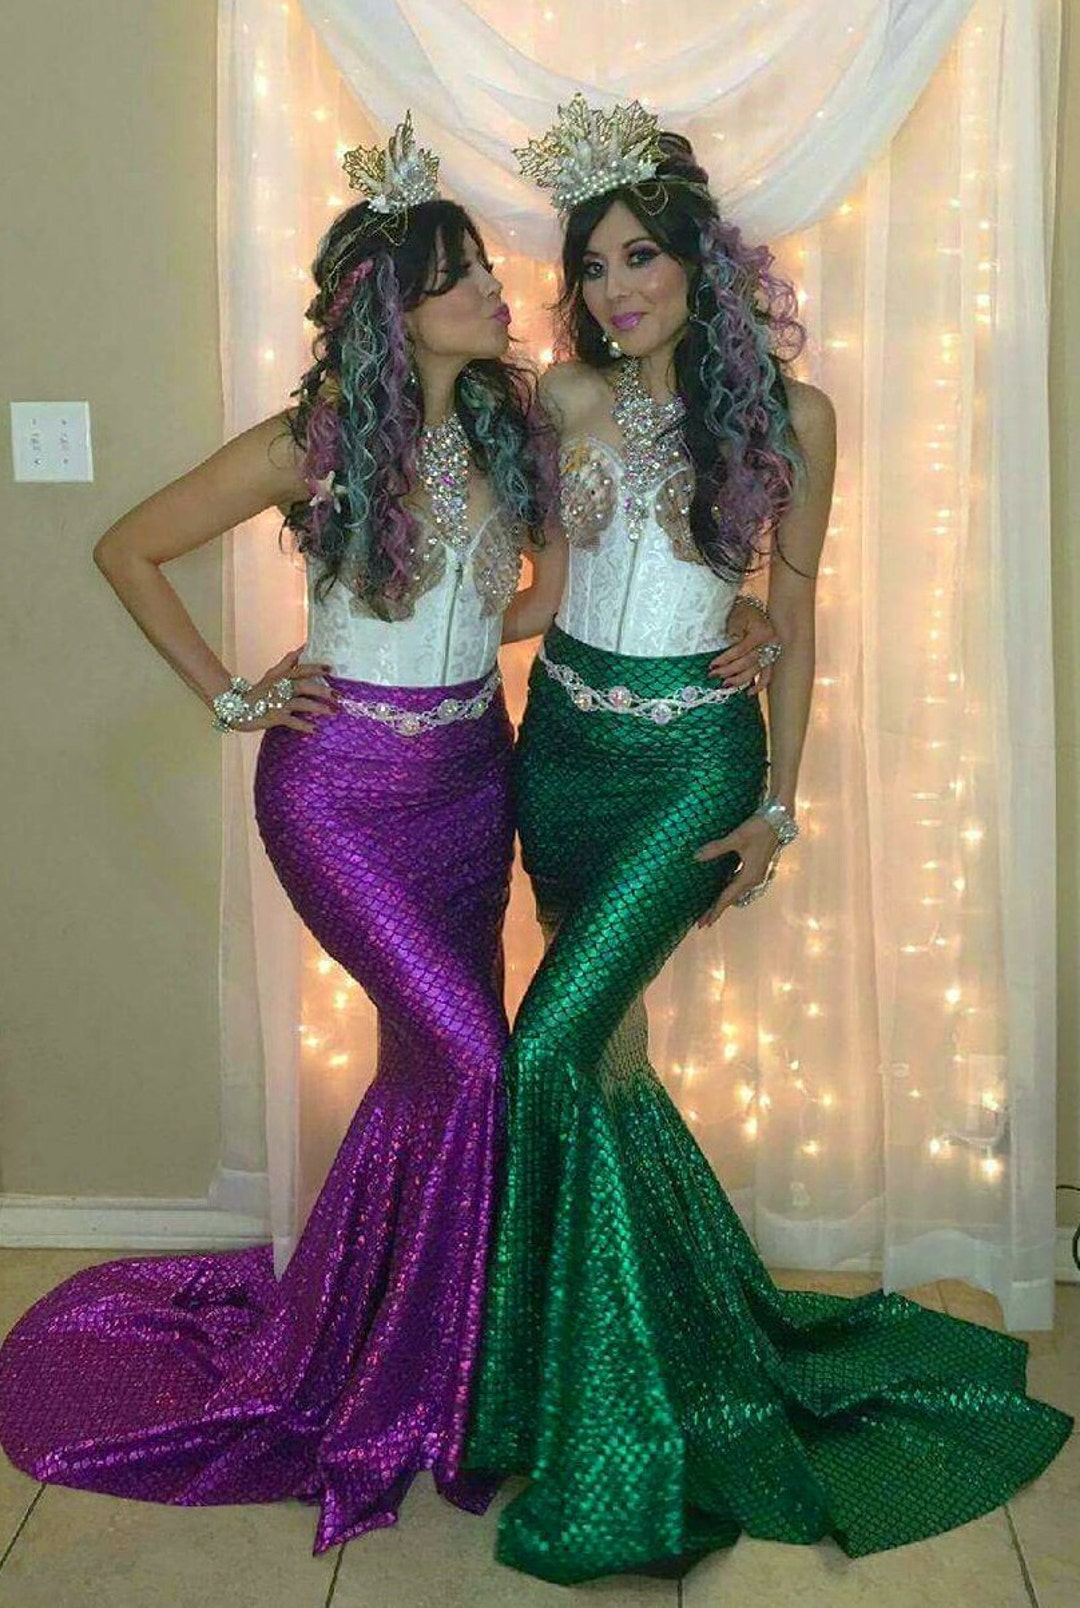 17 Color Choices Mermaid Skirt Fish Tail Costume, Scales Print Stretch, Kim  K Mermaid Skirt , Metallic Green Purple Turquoise and Black 